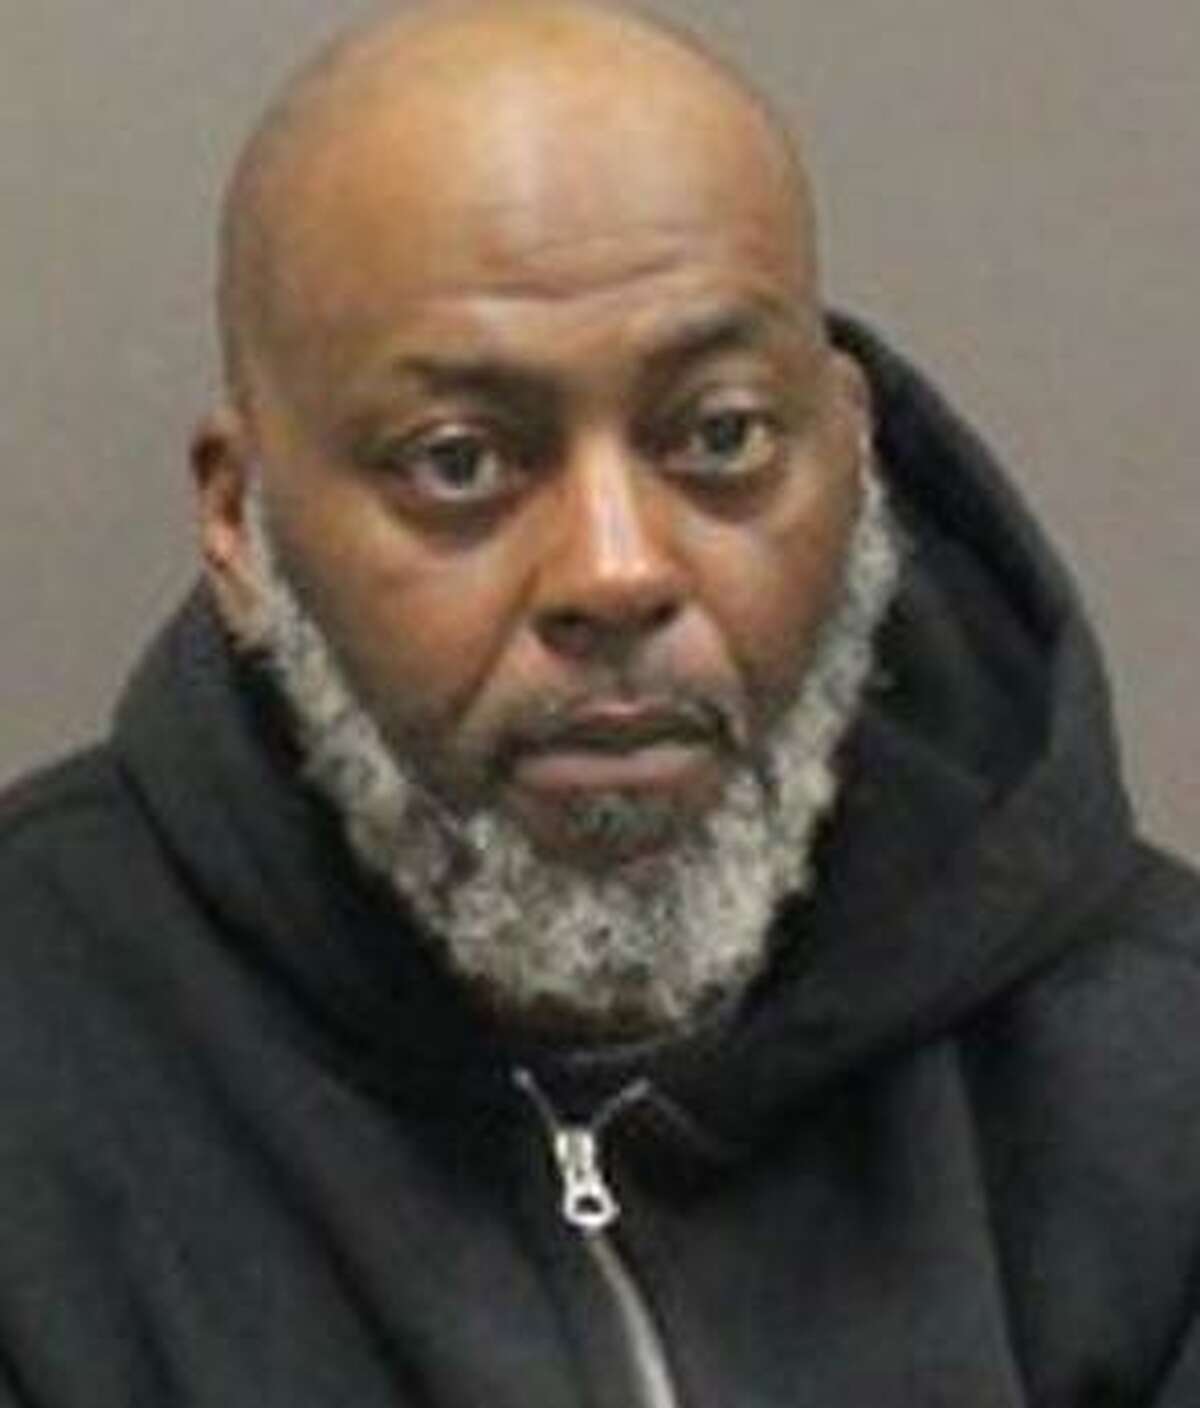 Paul Burruss Sr., 52, of New Haven was charged Wednesday with murder and other offenses related to the deadly shooting of Carlos Gore Jr.